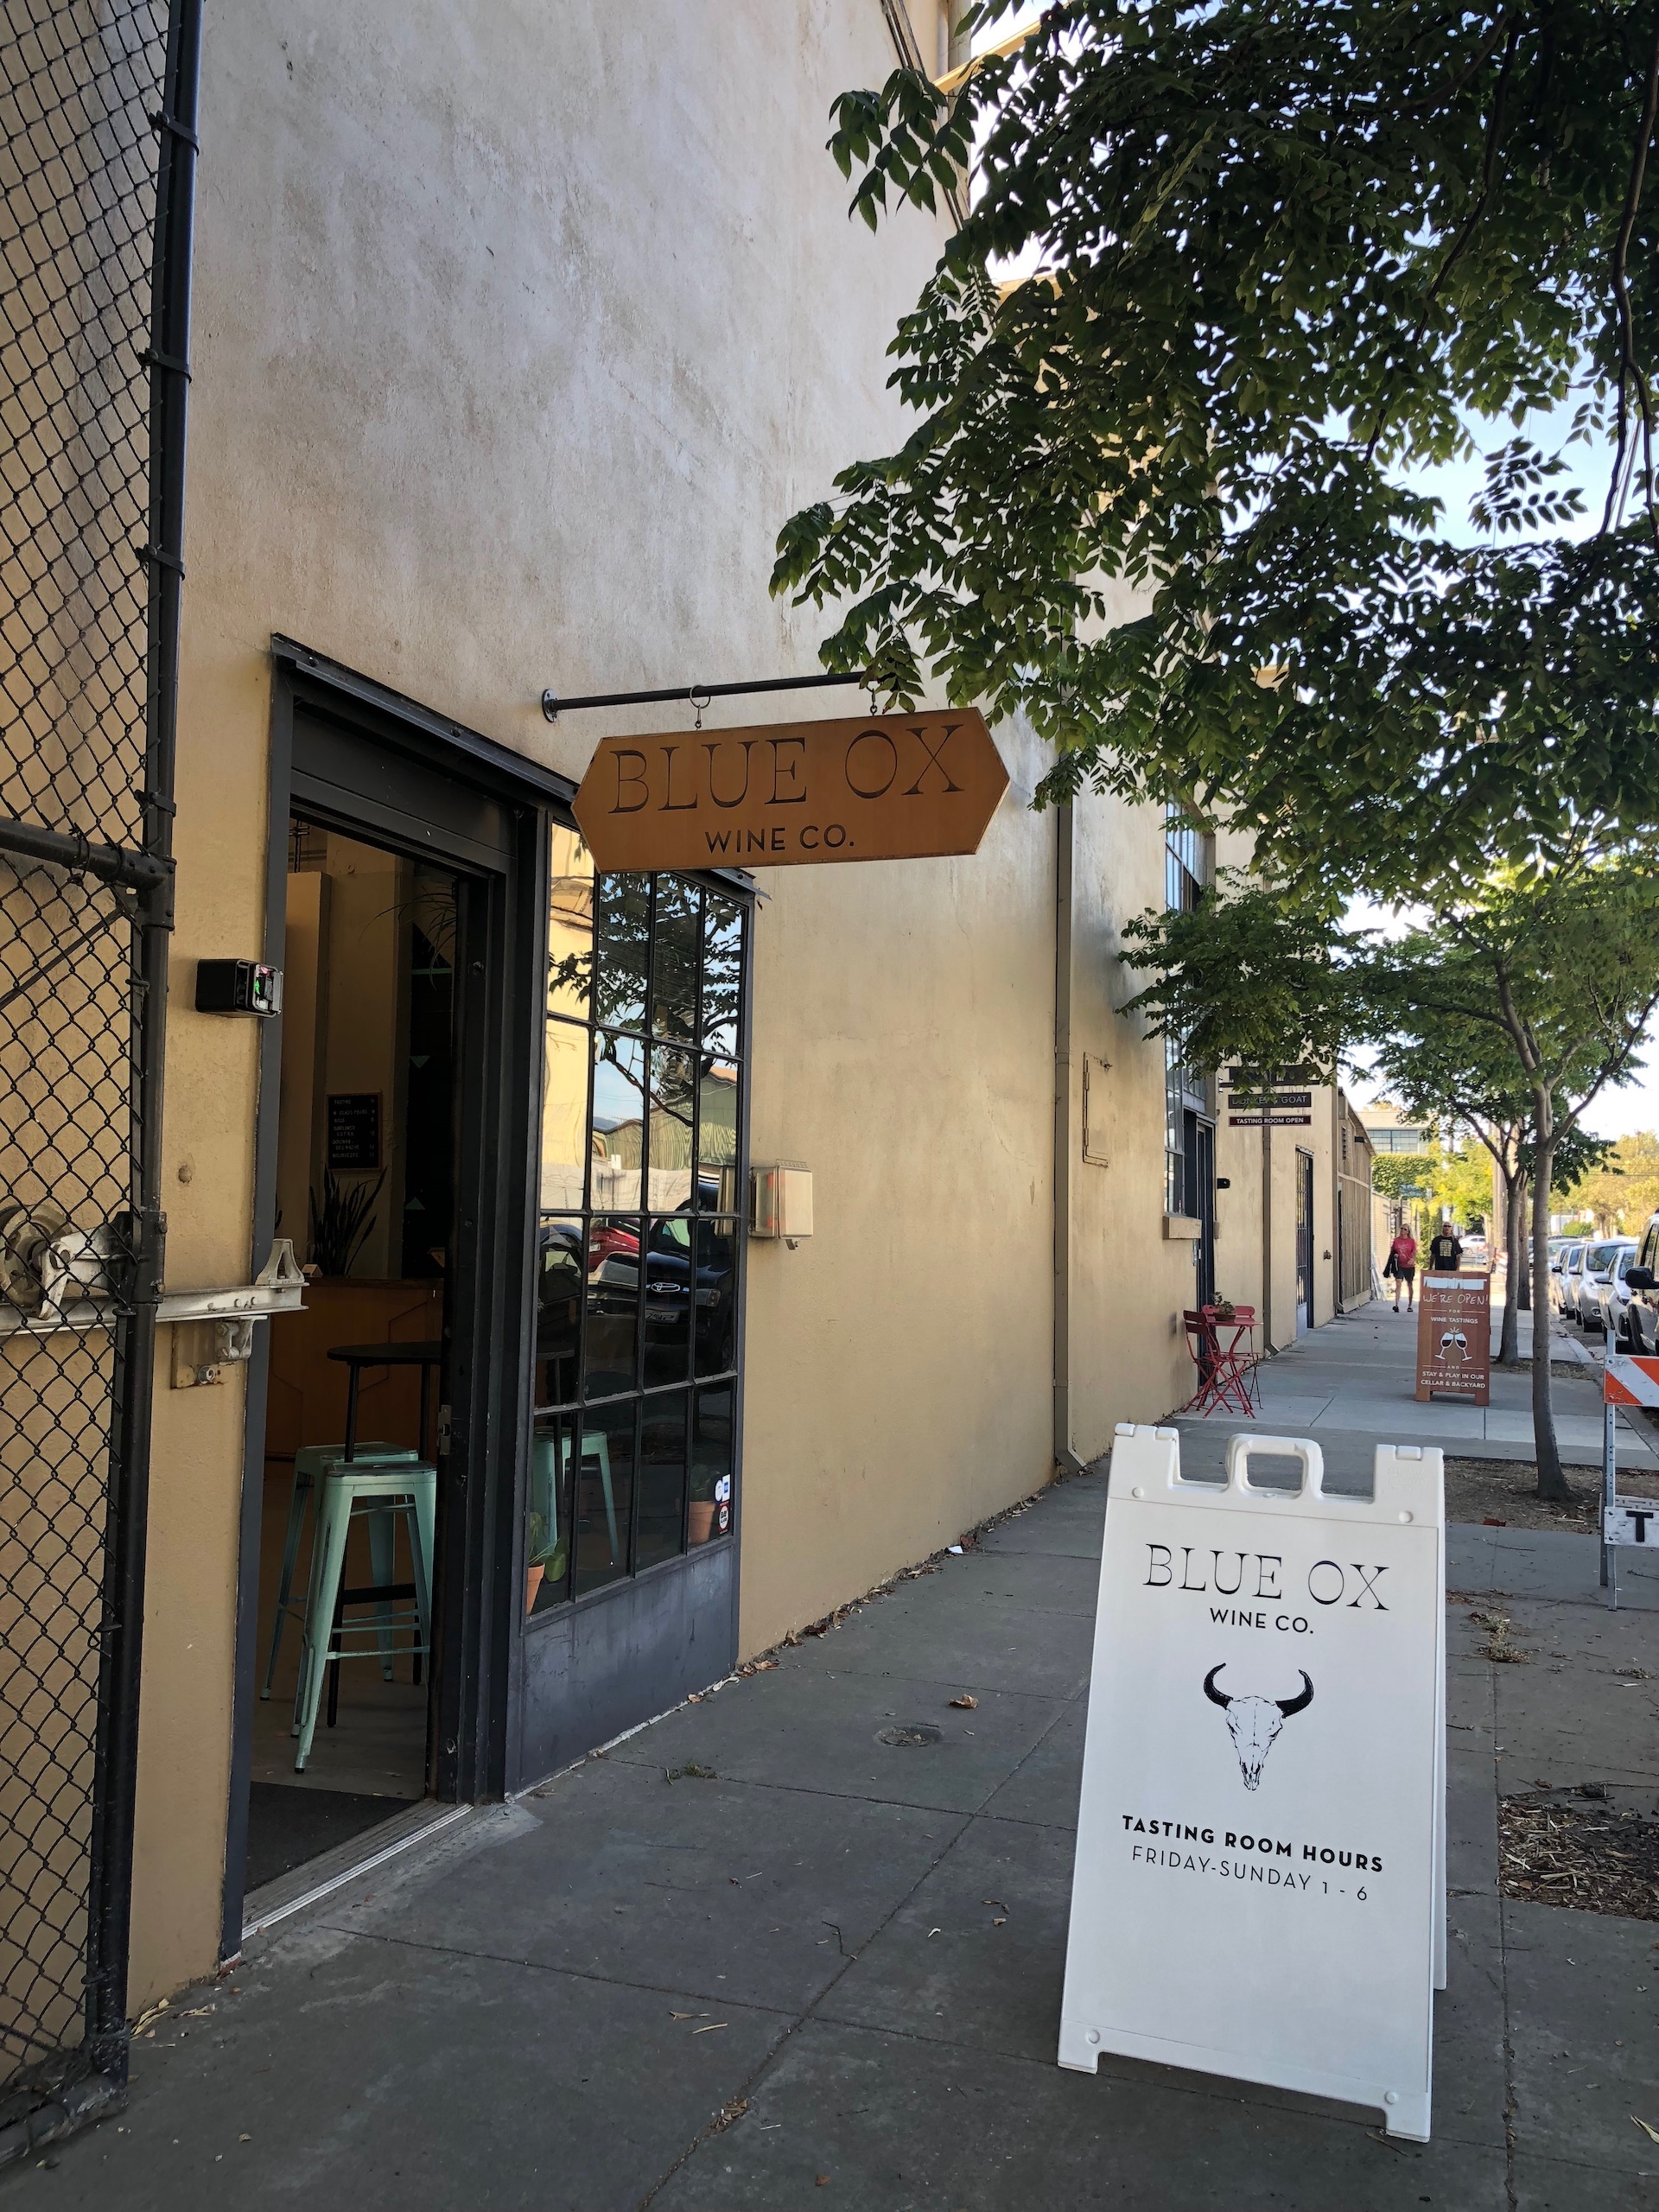 Blue Ox is located on what has become a sort of “winery row” on Berkeley’s Fifth Street